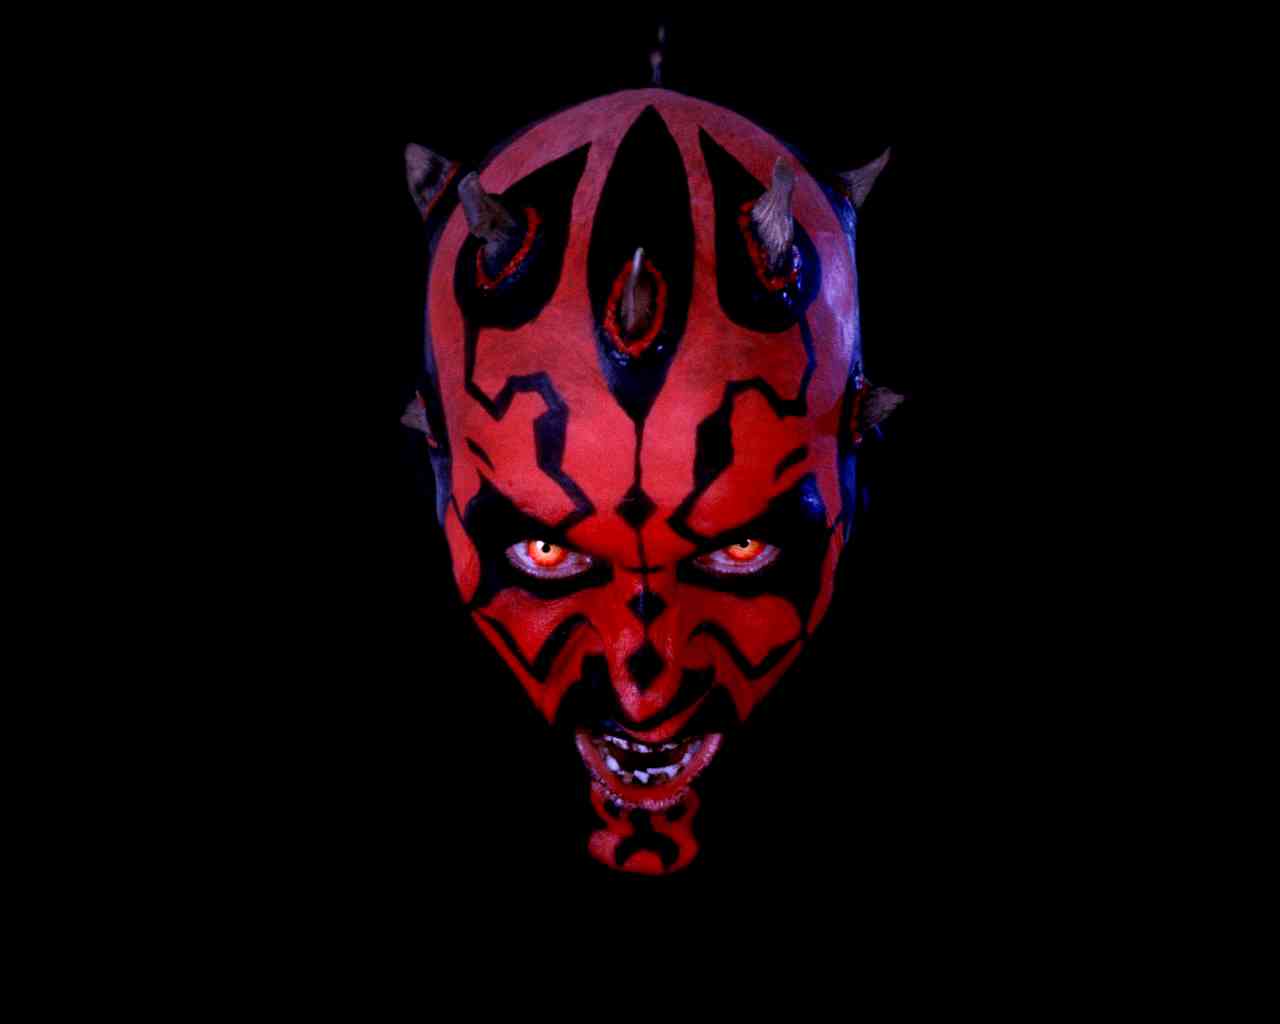 Darth Maul Star Wars Wallpaper High Quality And 1280x1024PX